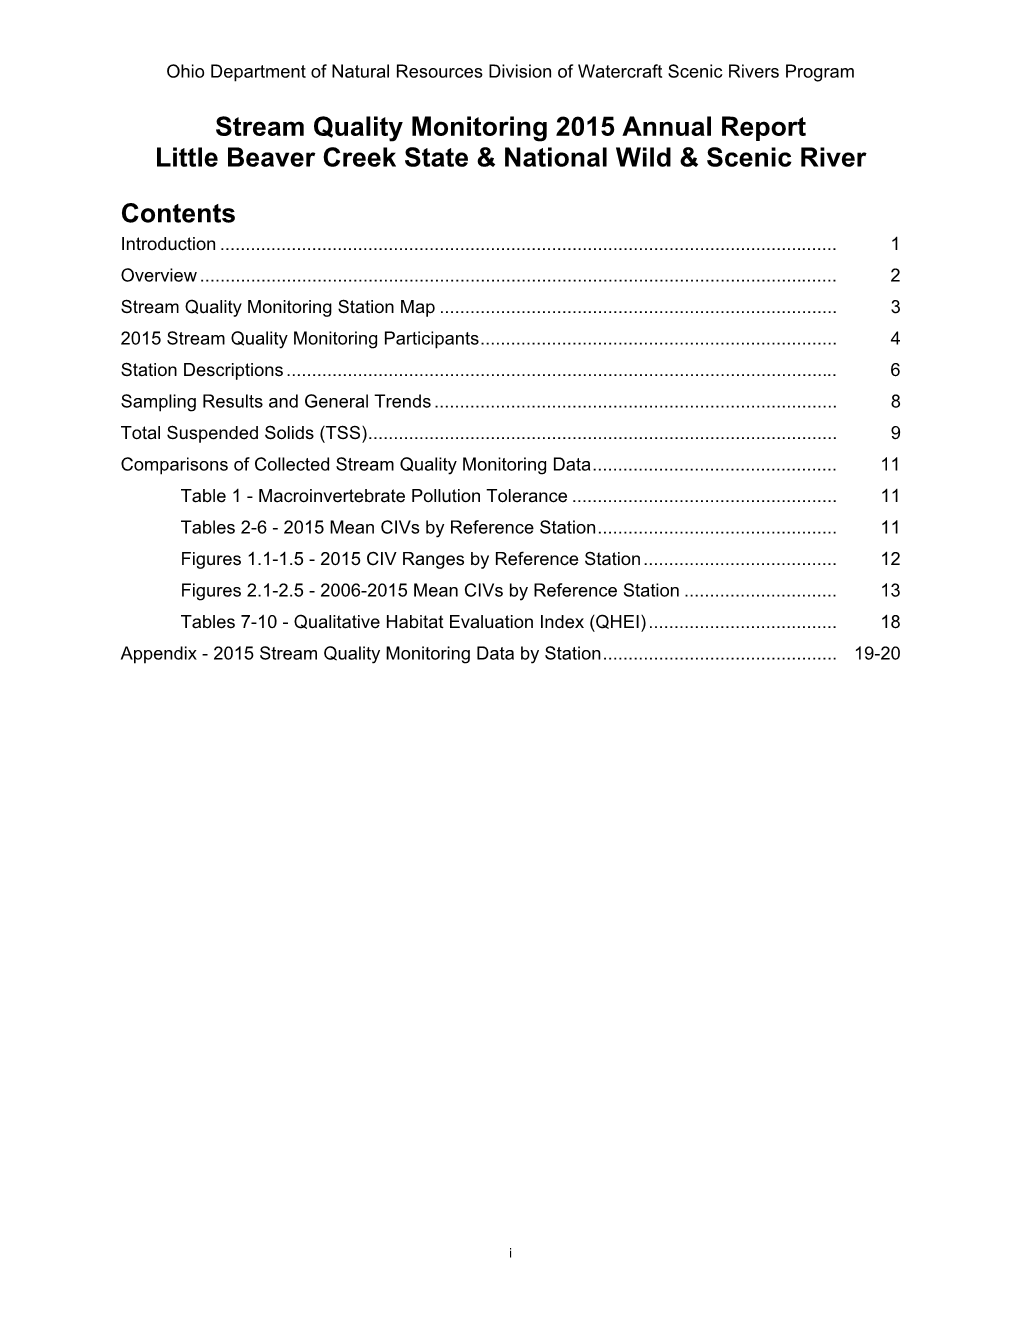 Stream Quality Monitoring 2015 Annual Report Little Beaver Creek State & National Wild & Scenic River